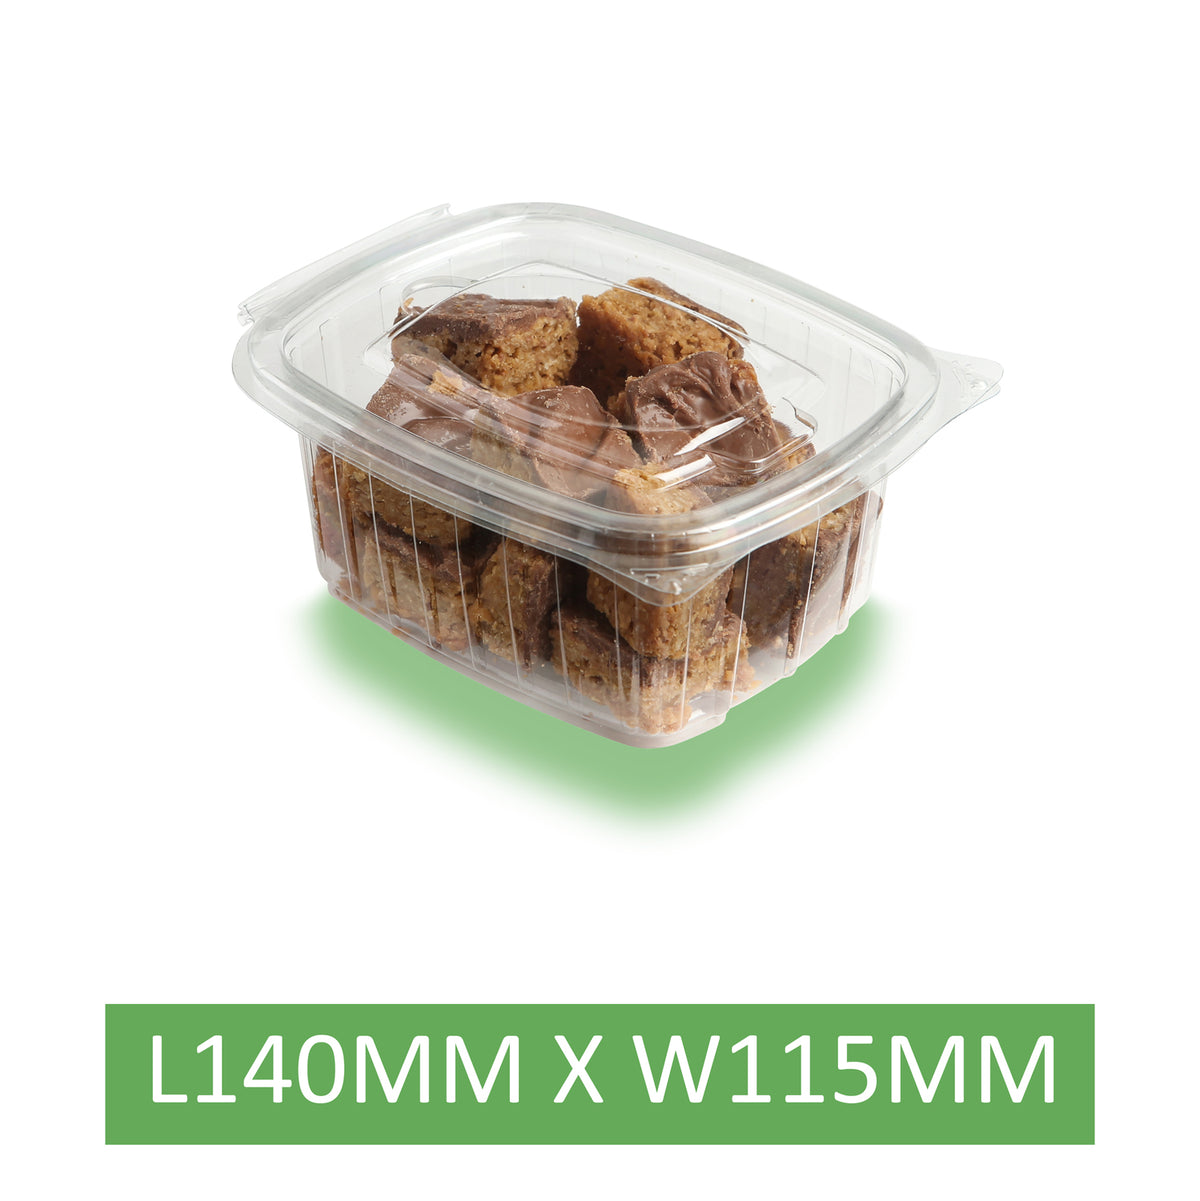 500 x 500cc Clear Cold Food/Salad/Cake Container With Hinged Lid. Bulk Box. Recyclable rpet